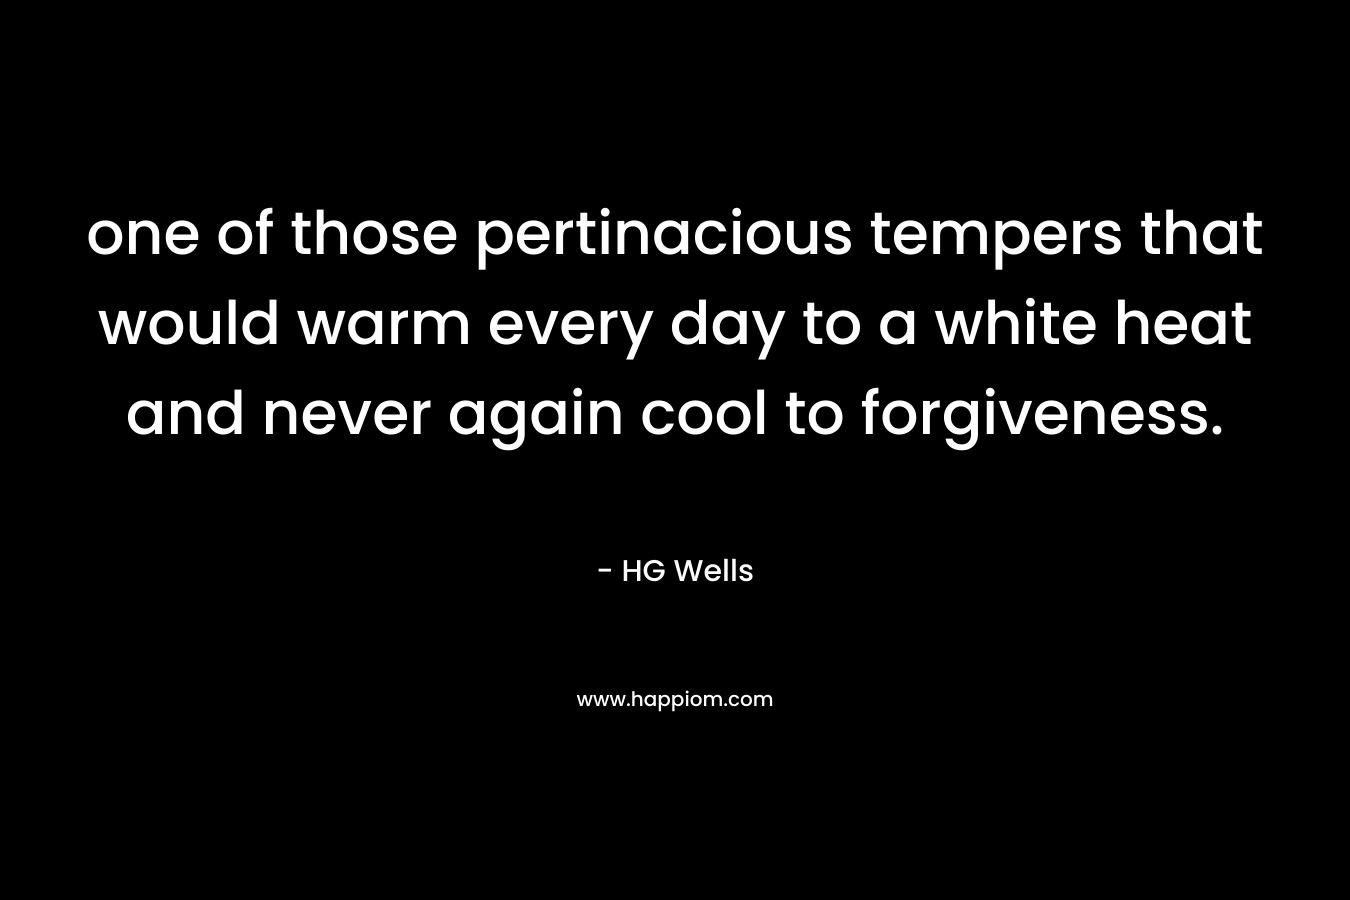 one of those pertinacious tempers that would warm every day to a white heat and never again cool to forgiveness. – HG Wells